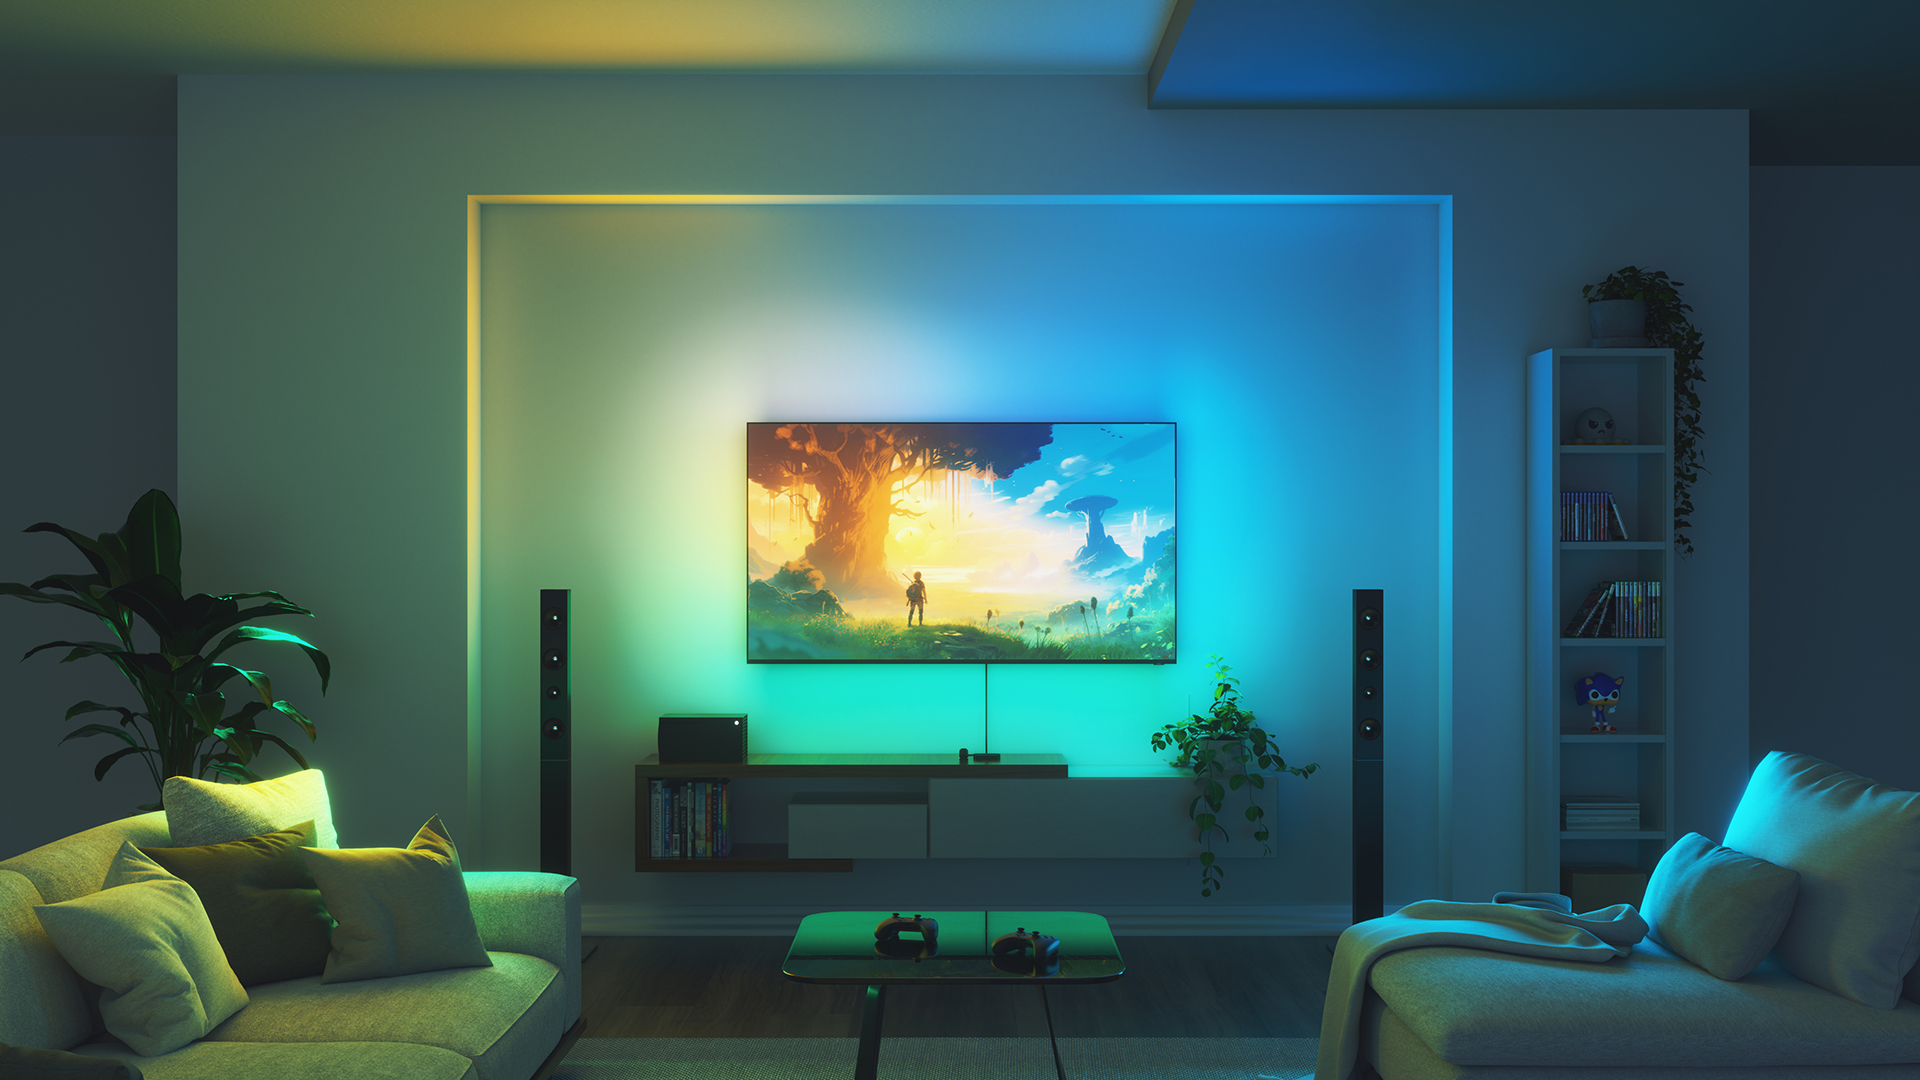 Nanoleaf 4D uses wizardry to give any TV Ambilight-style lighting